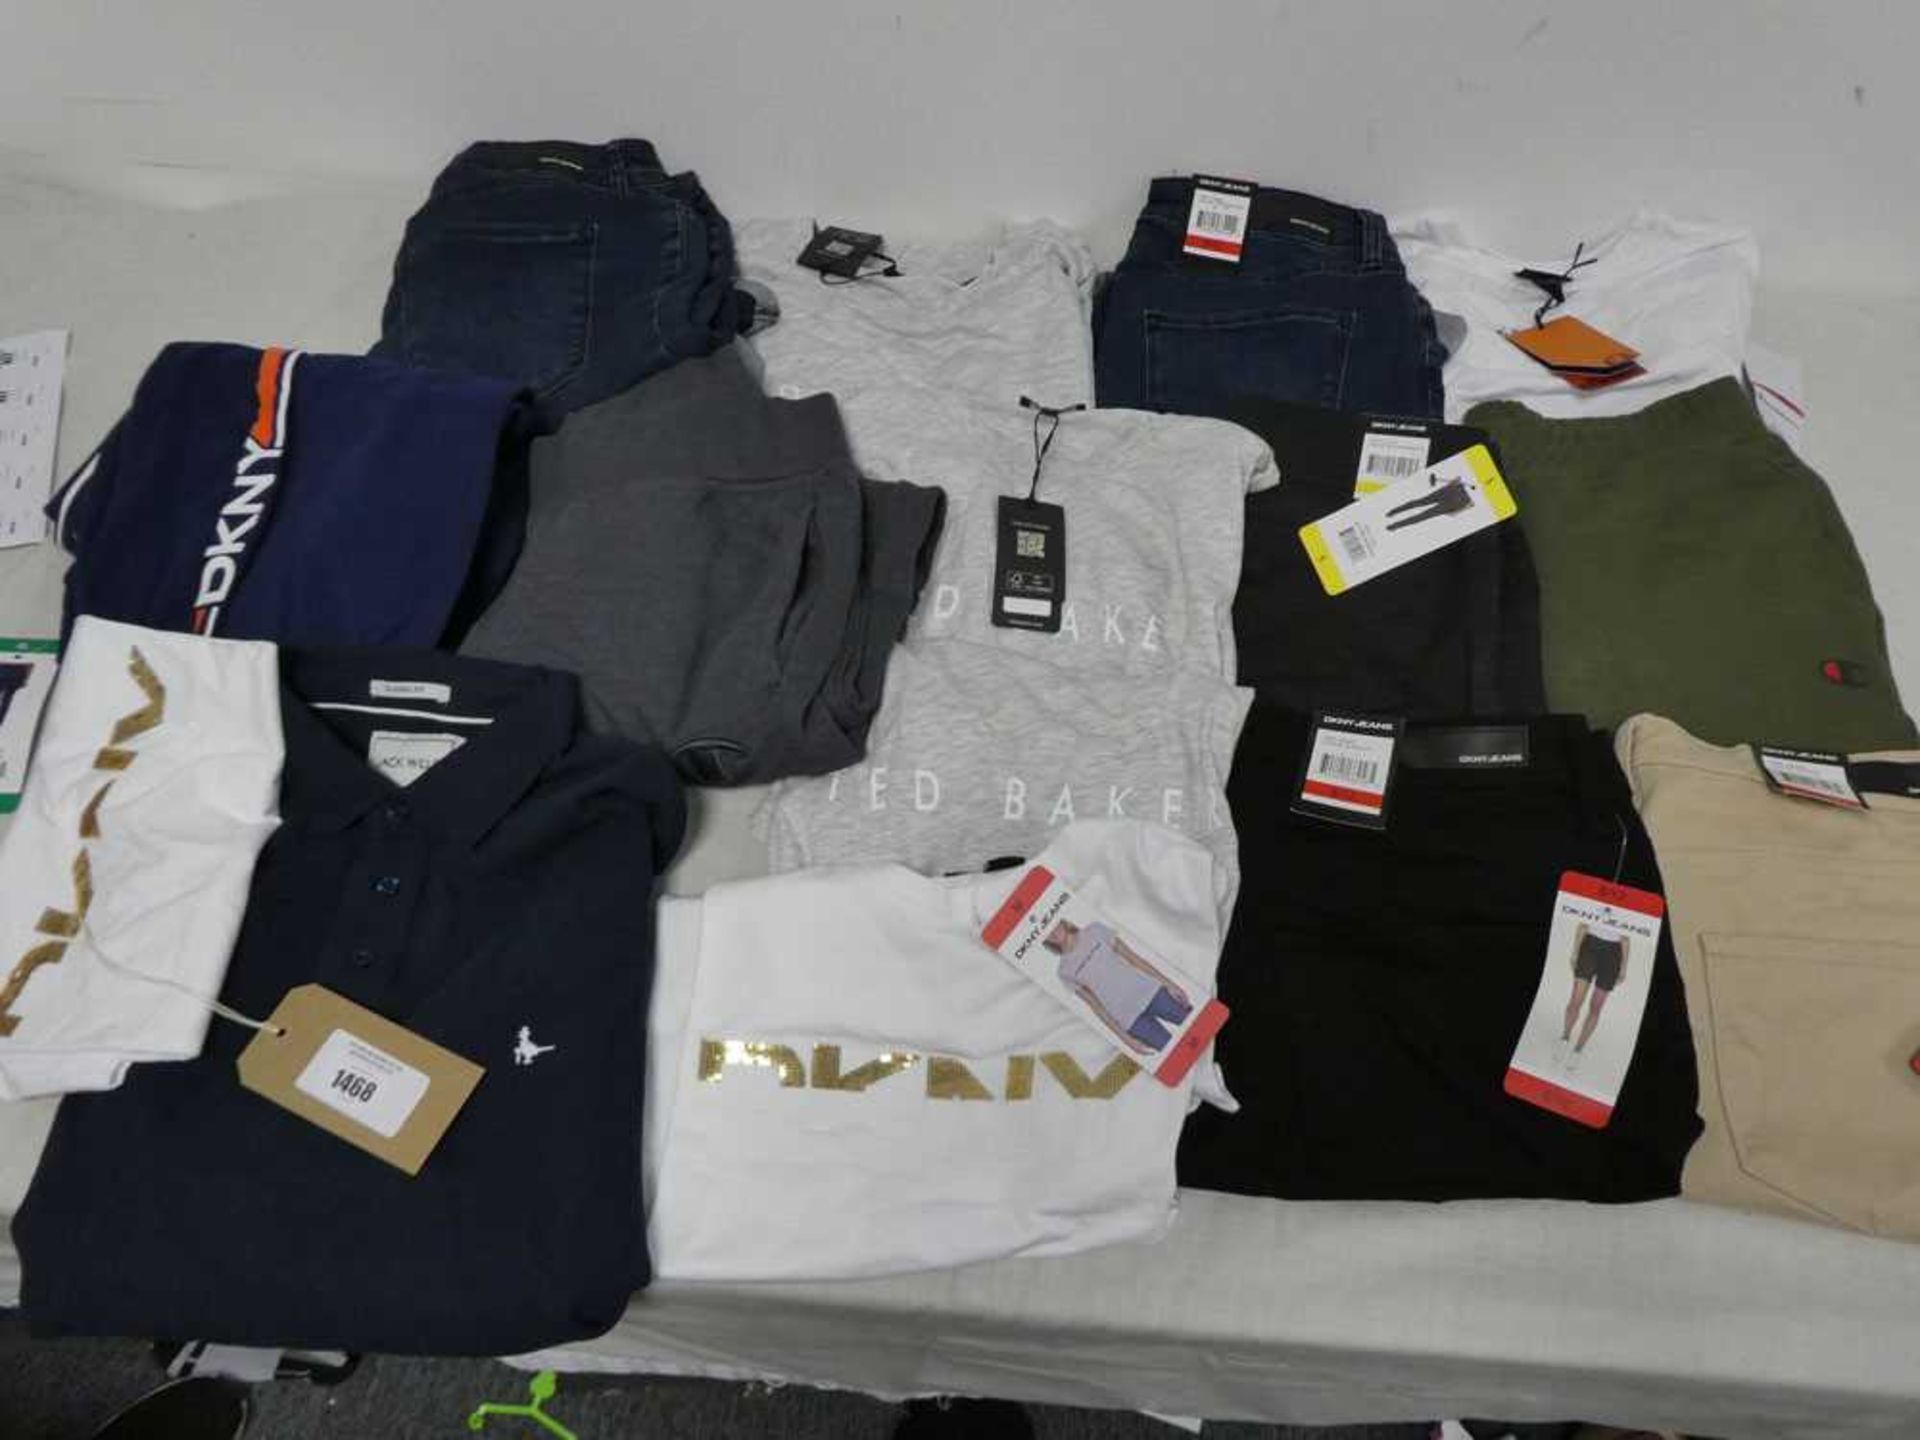 +VAT 15 items of clothing, incl. Ellesse, Champion, DKNY, Ted Baker and Jack Wills